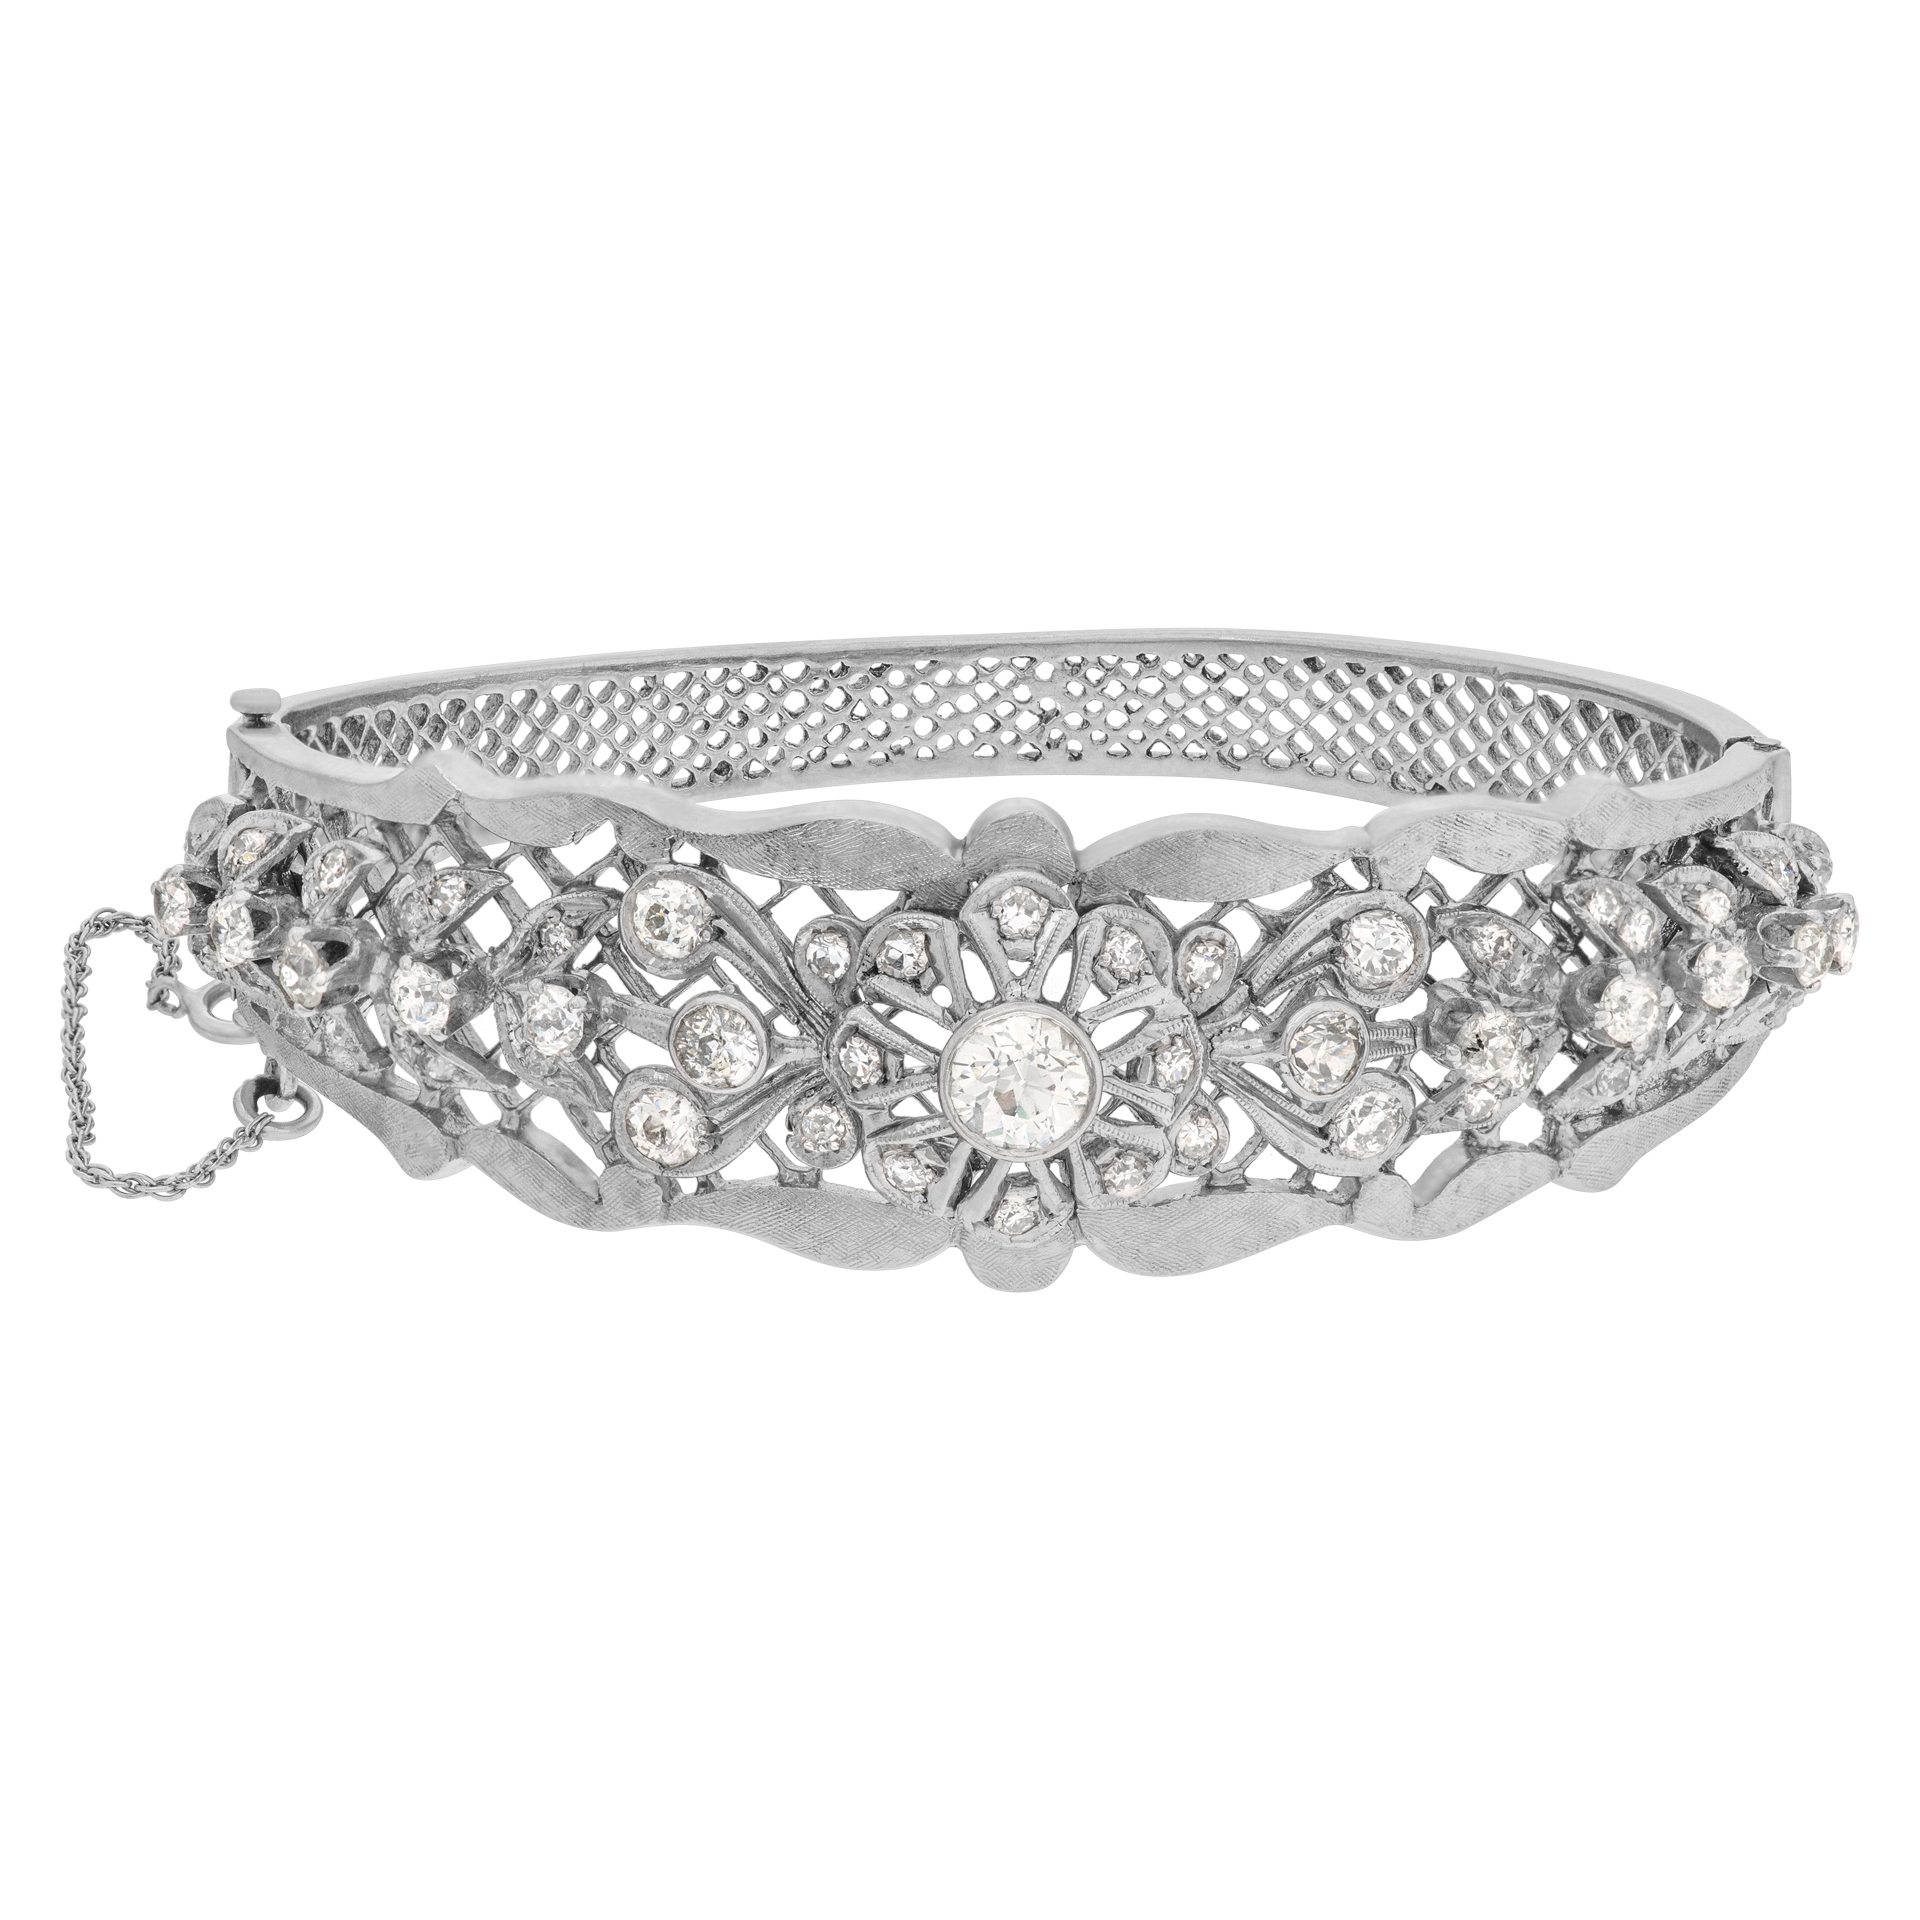 Diamond bangle with approximately .70 carat in center and appr. 2 carats in surrounding diamonds in 14k white gold